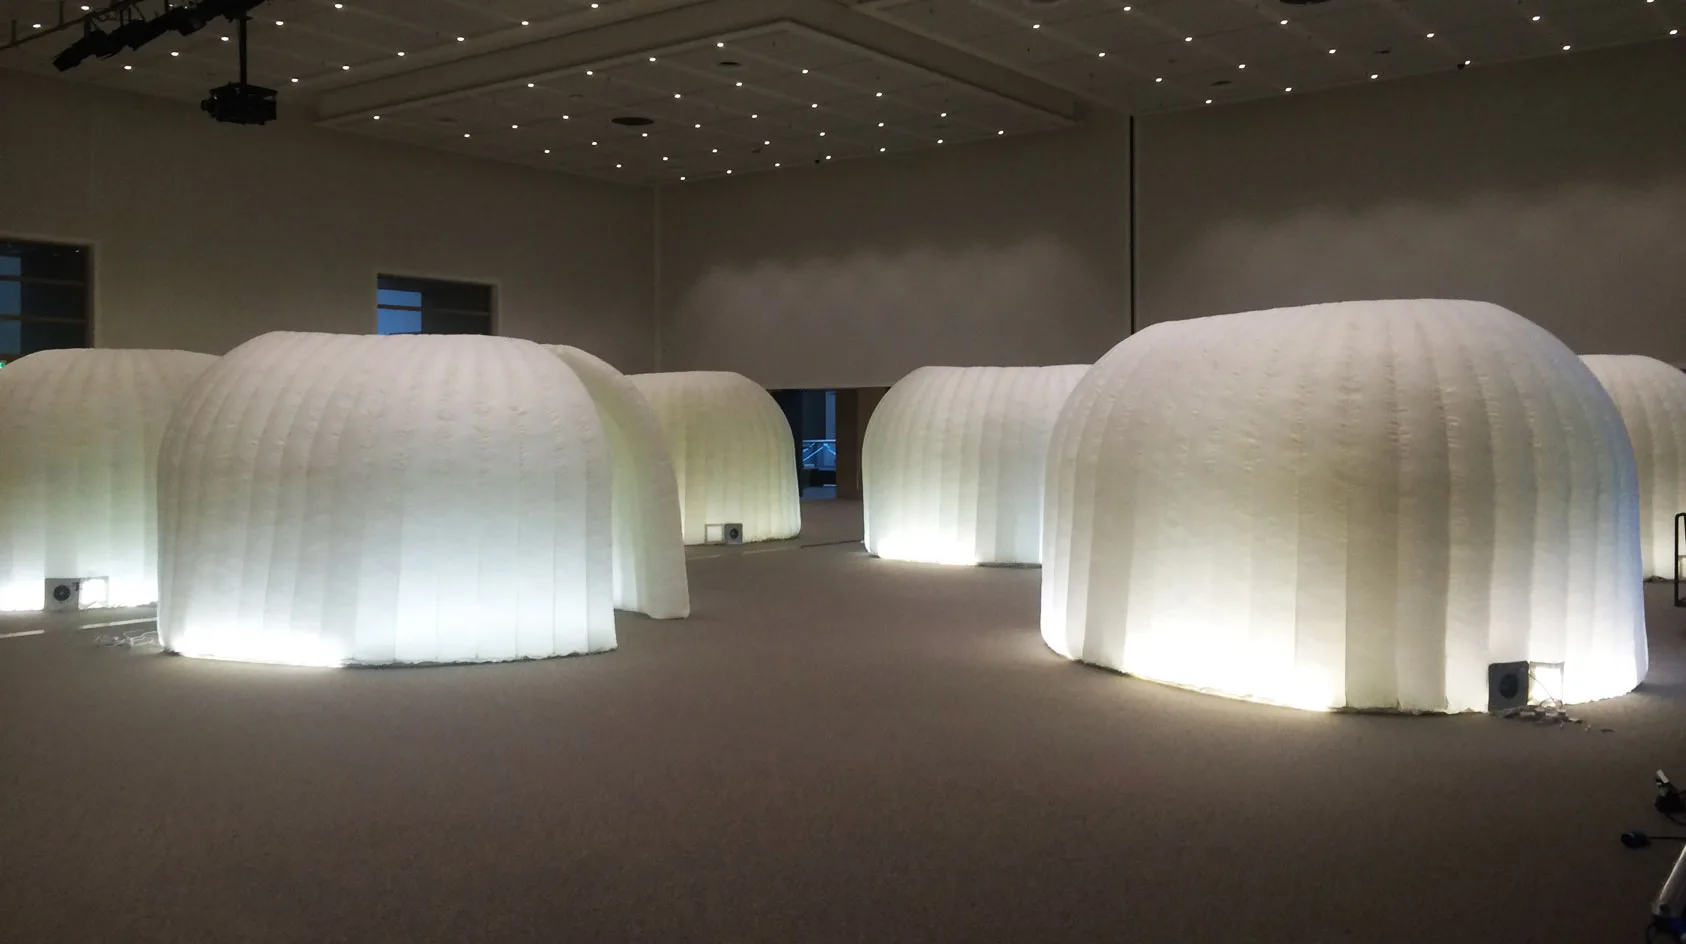 Pic showing several Created By Air inflatable office pods installed as enclosed breakout rooms at an indoor event